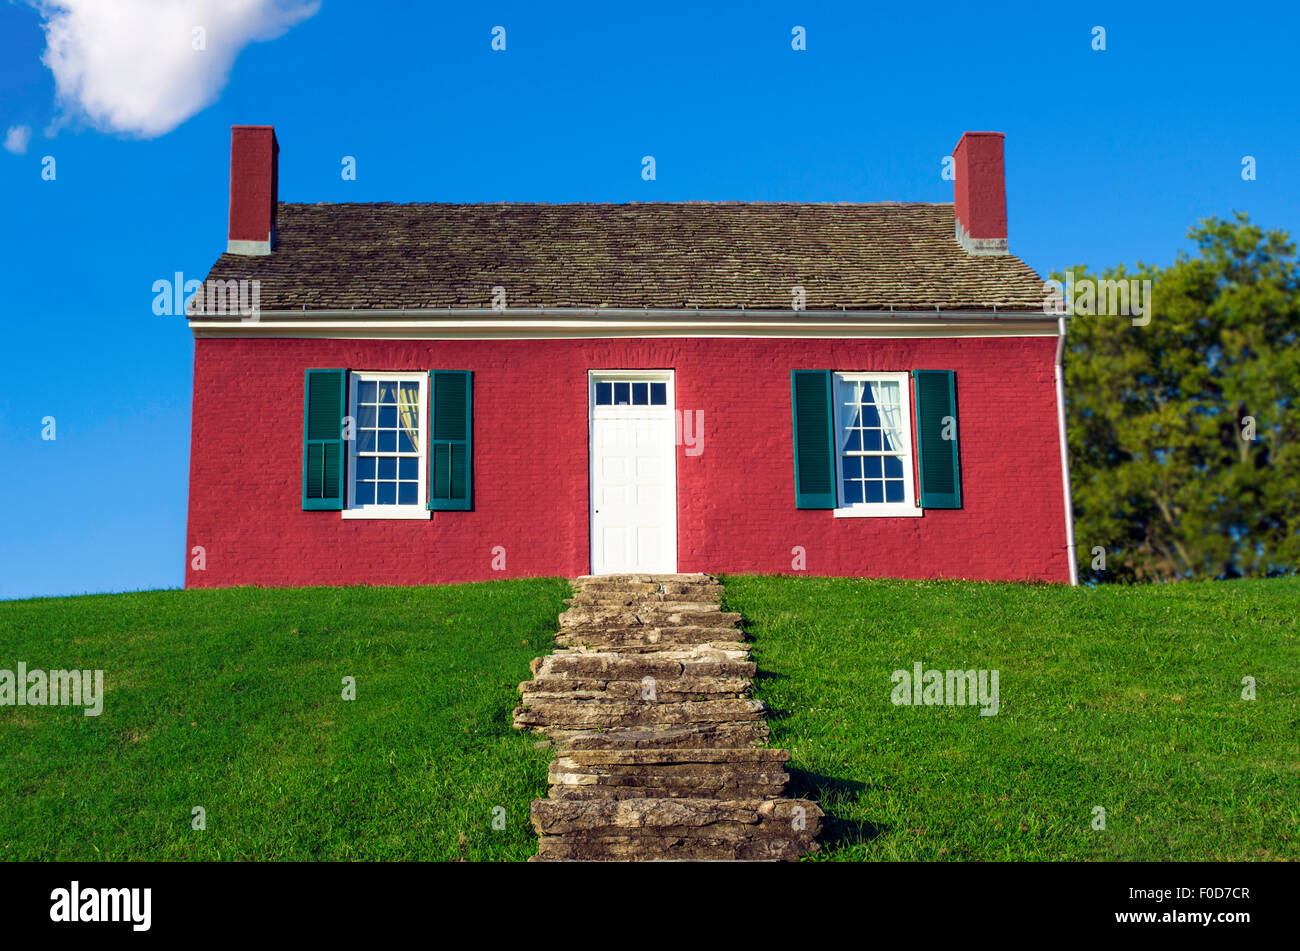 a vibrant picture of the historic john rankin house, a crucial stop for freedom on the underground railroad locatein ripley ohio Stock Photo